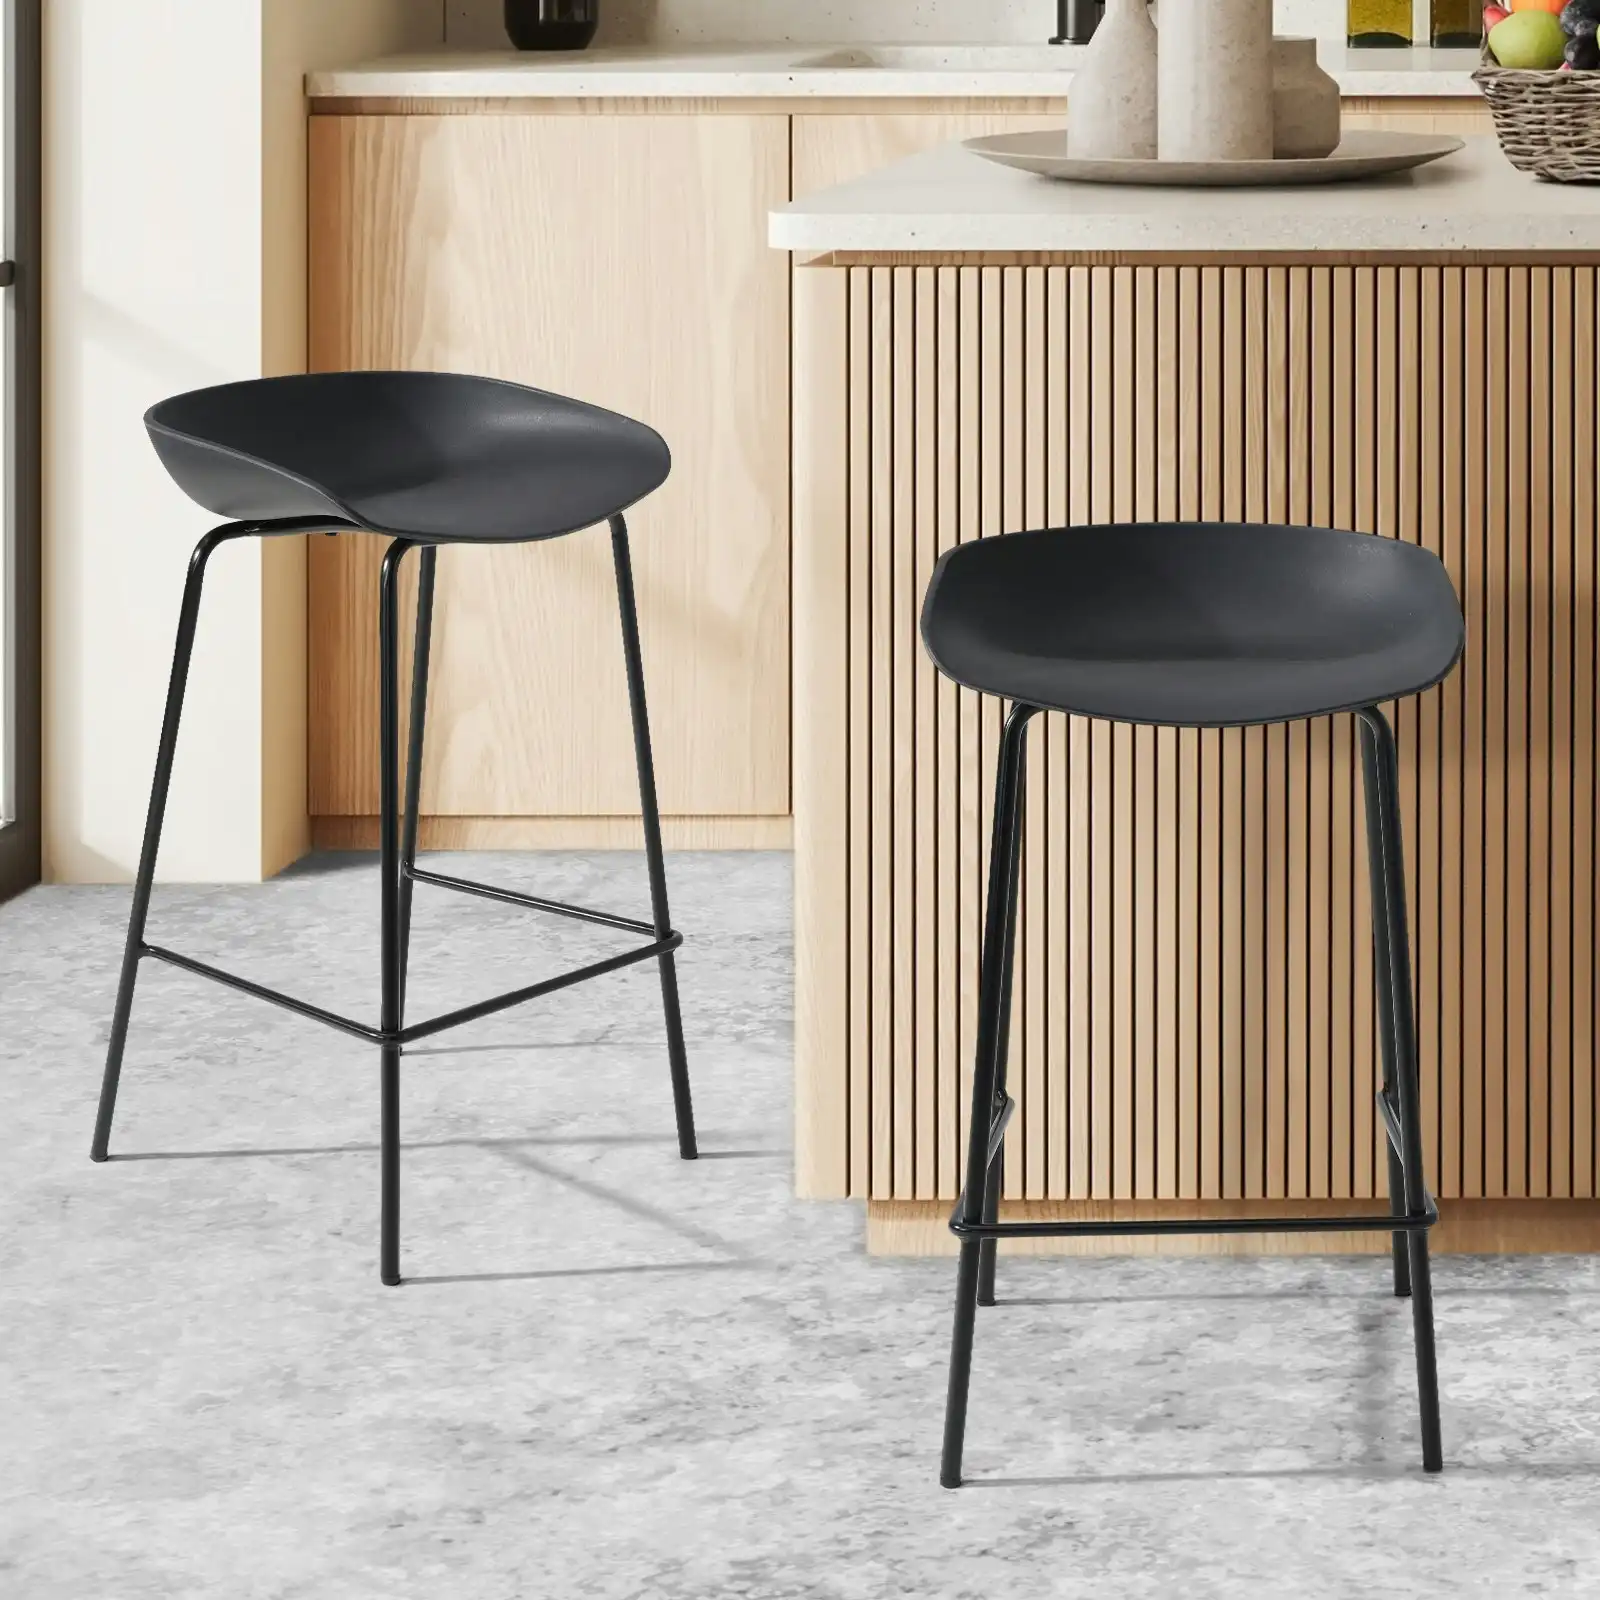 Oikiture 2x Kitchen Bar Stools Stool Dinning Counter Chairs Metal Black